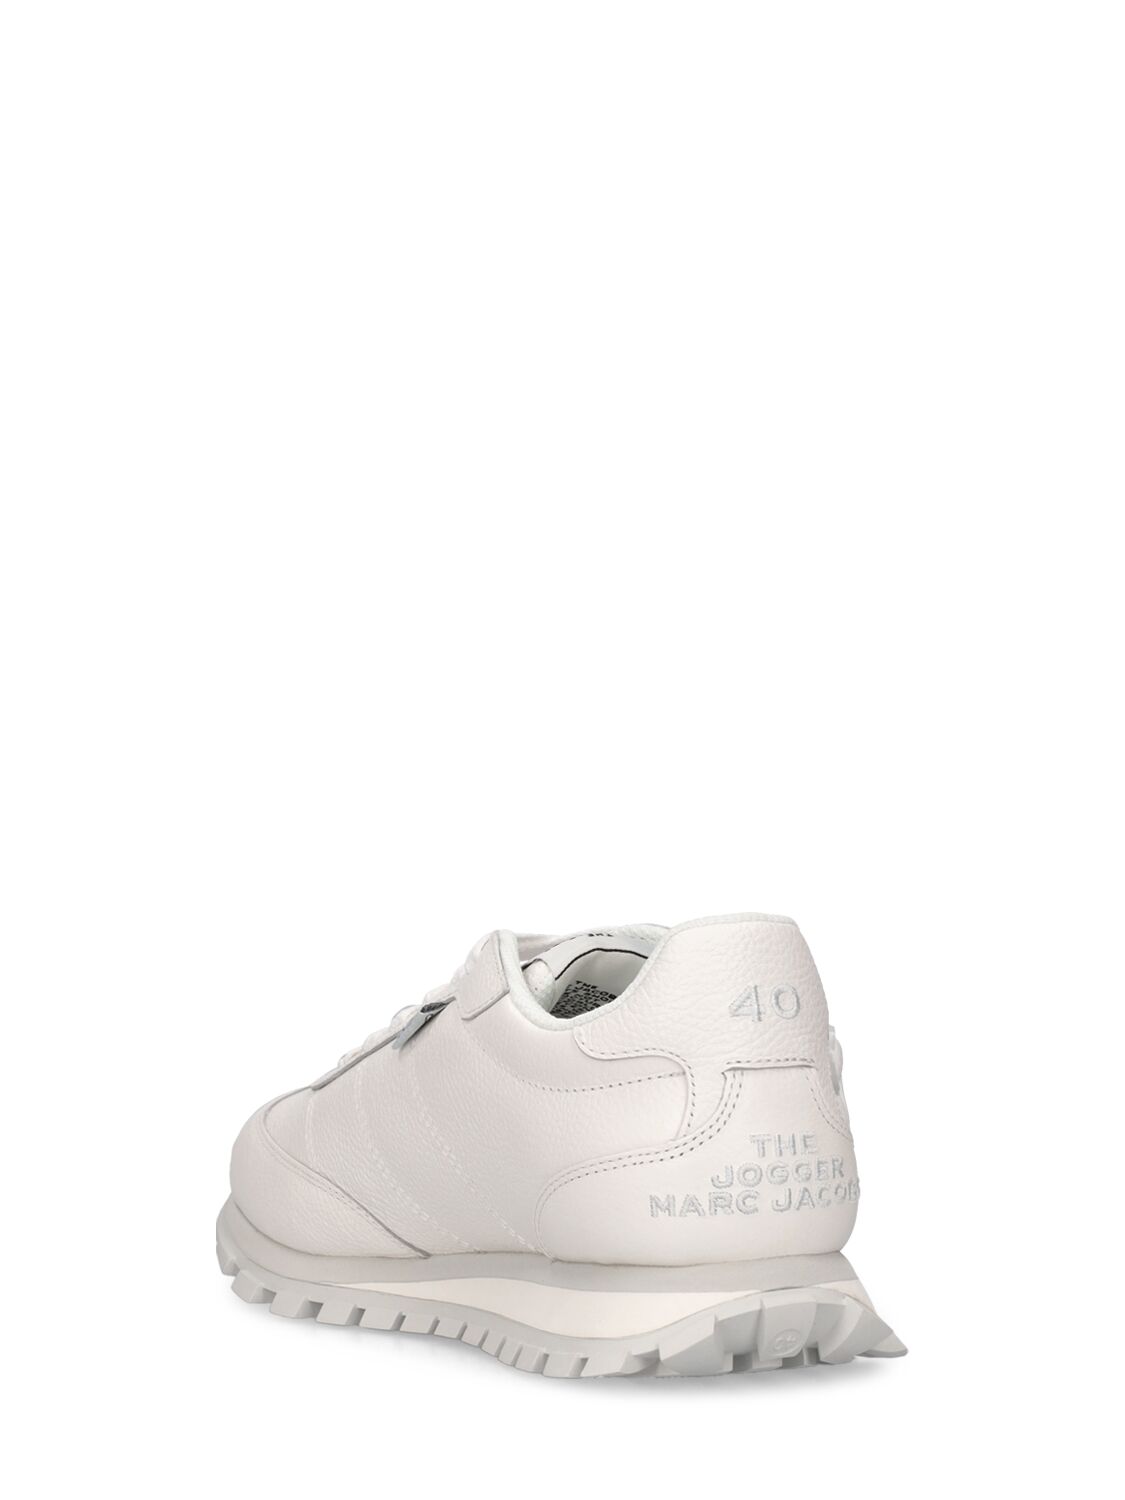 Shop Marc Jacobs The Leather Jogger Sneakers In White